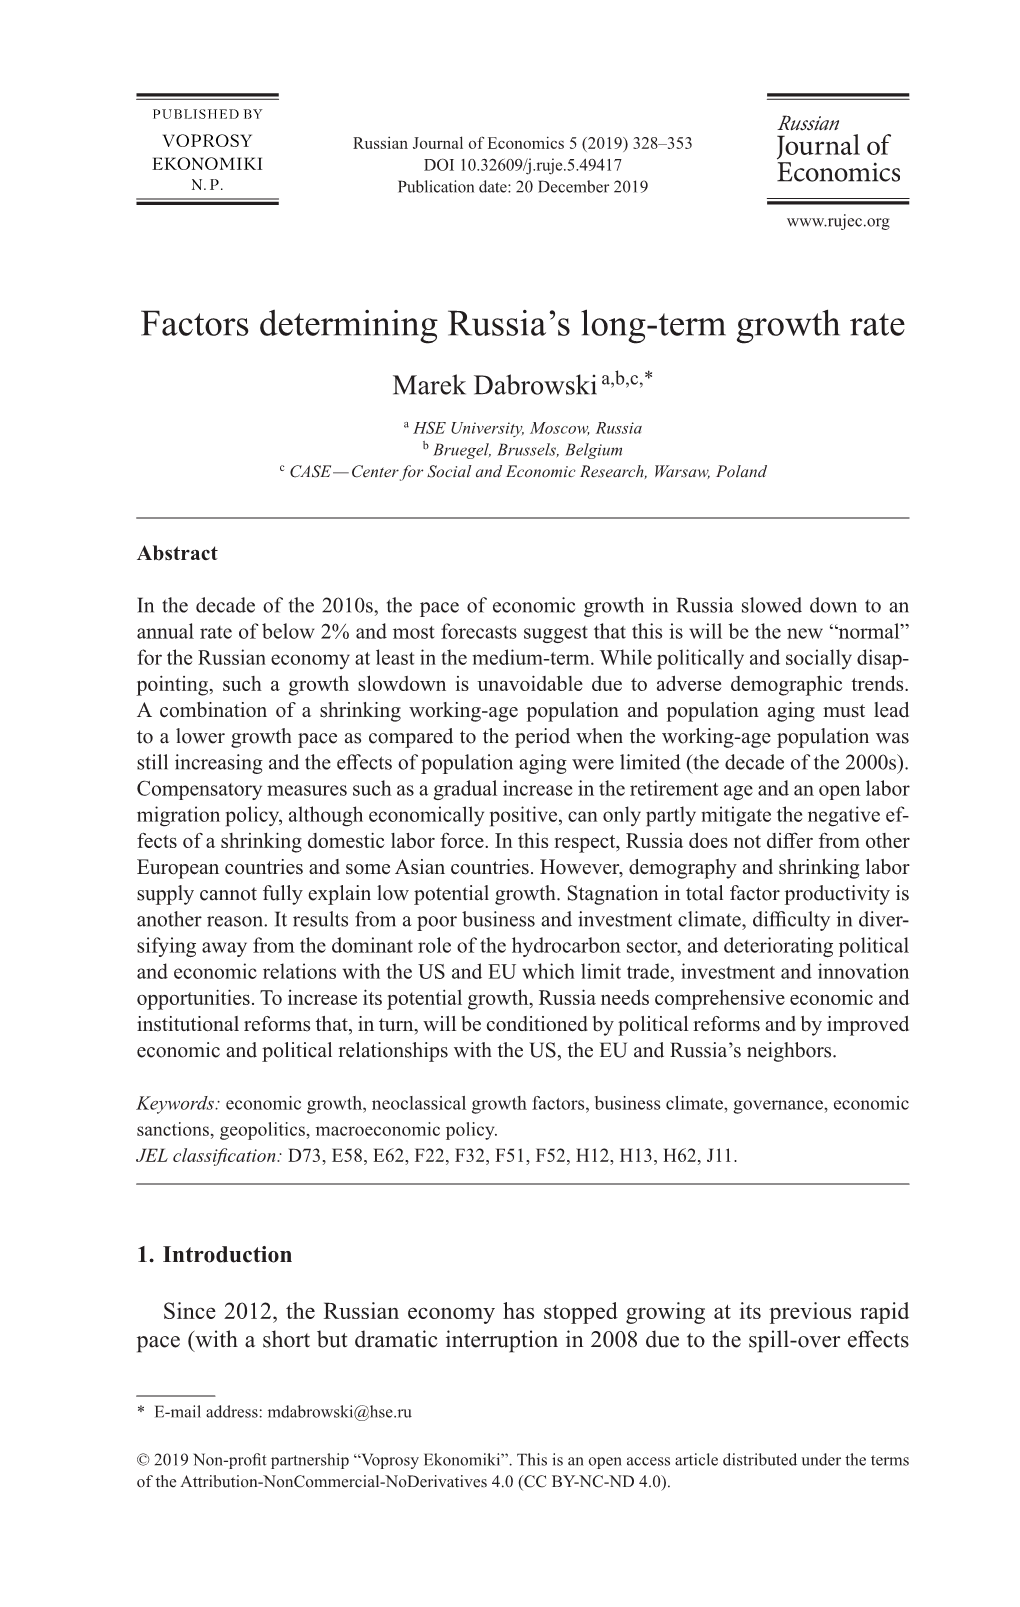 Factors Determining Russia's Long-Term Growth Rate